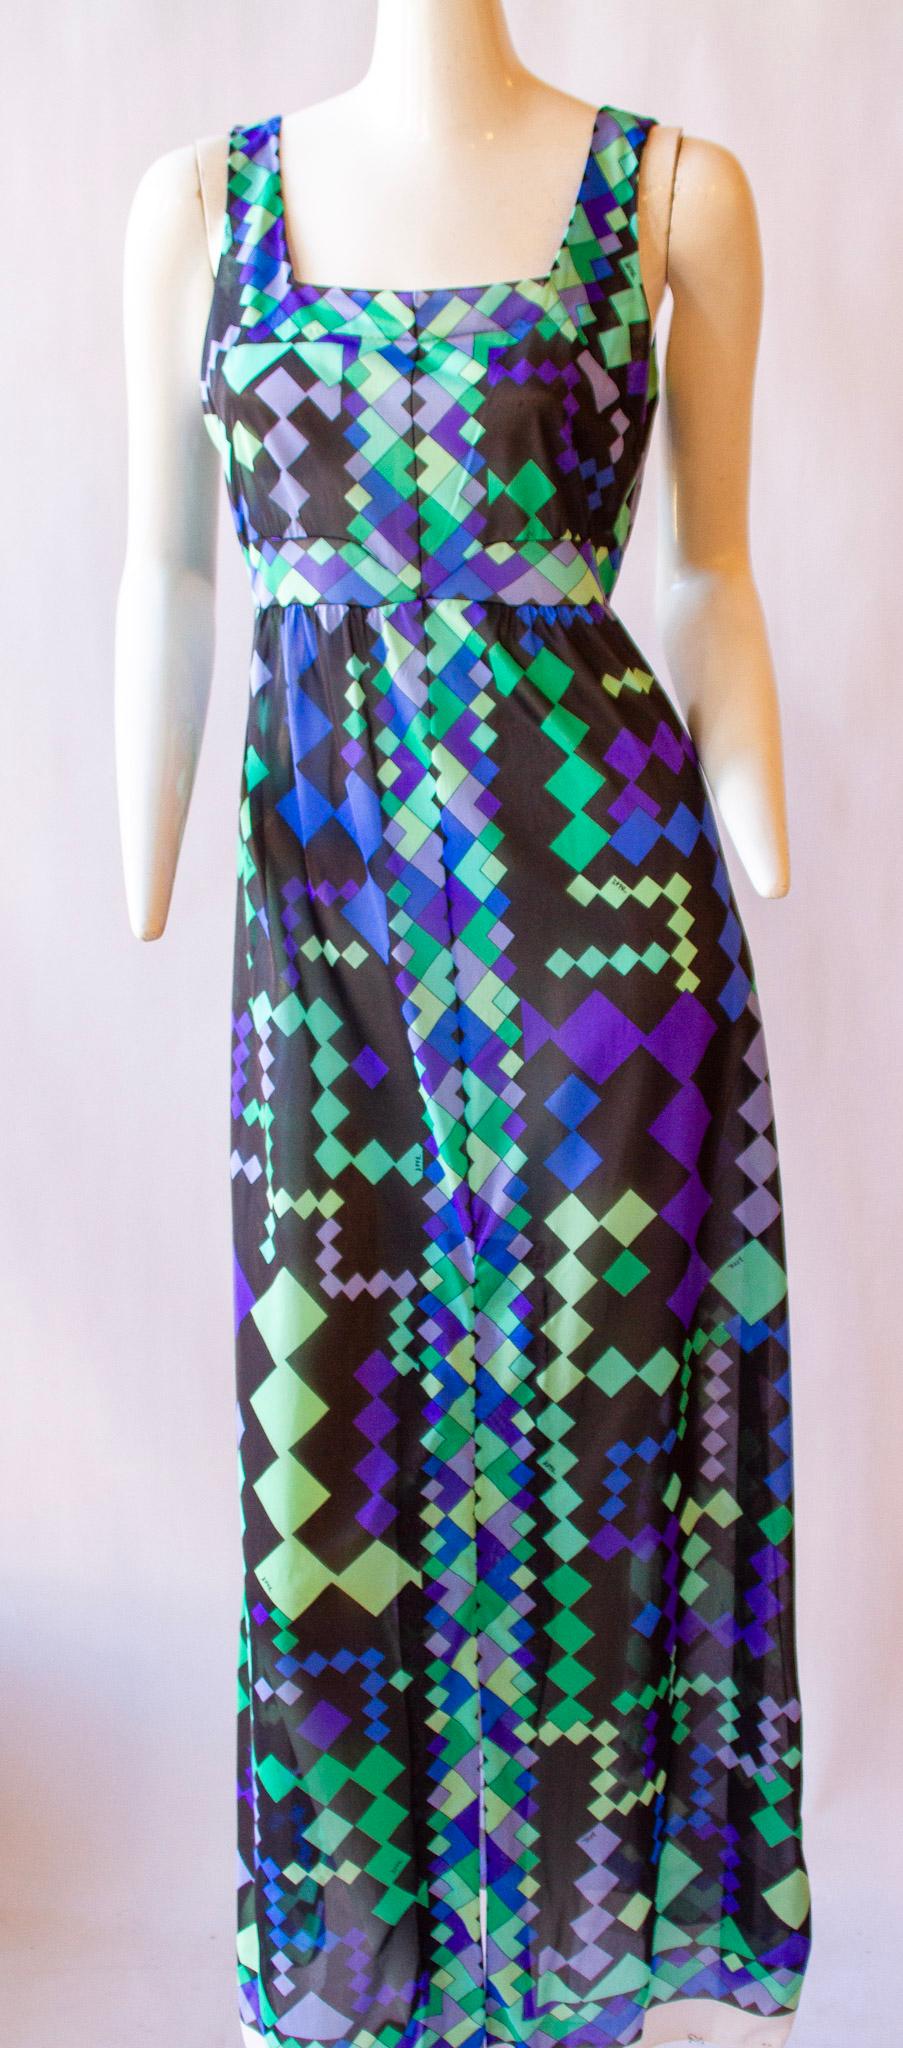 EMILIO PUCCI for Formfit Rogers, Two-Piece Silk Ensemble, Long Green and Purple Diamond Print Sleeveless Dress with Square Neck and Long Matching Shell with Front Buttons and Ruffle Collar, circa 1959-1960

This is a gorgeous silk ensemble. Soft to